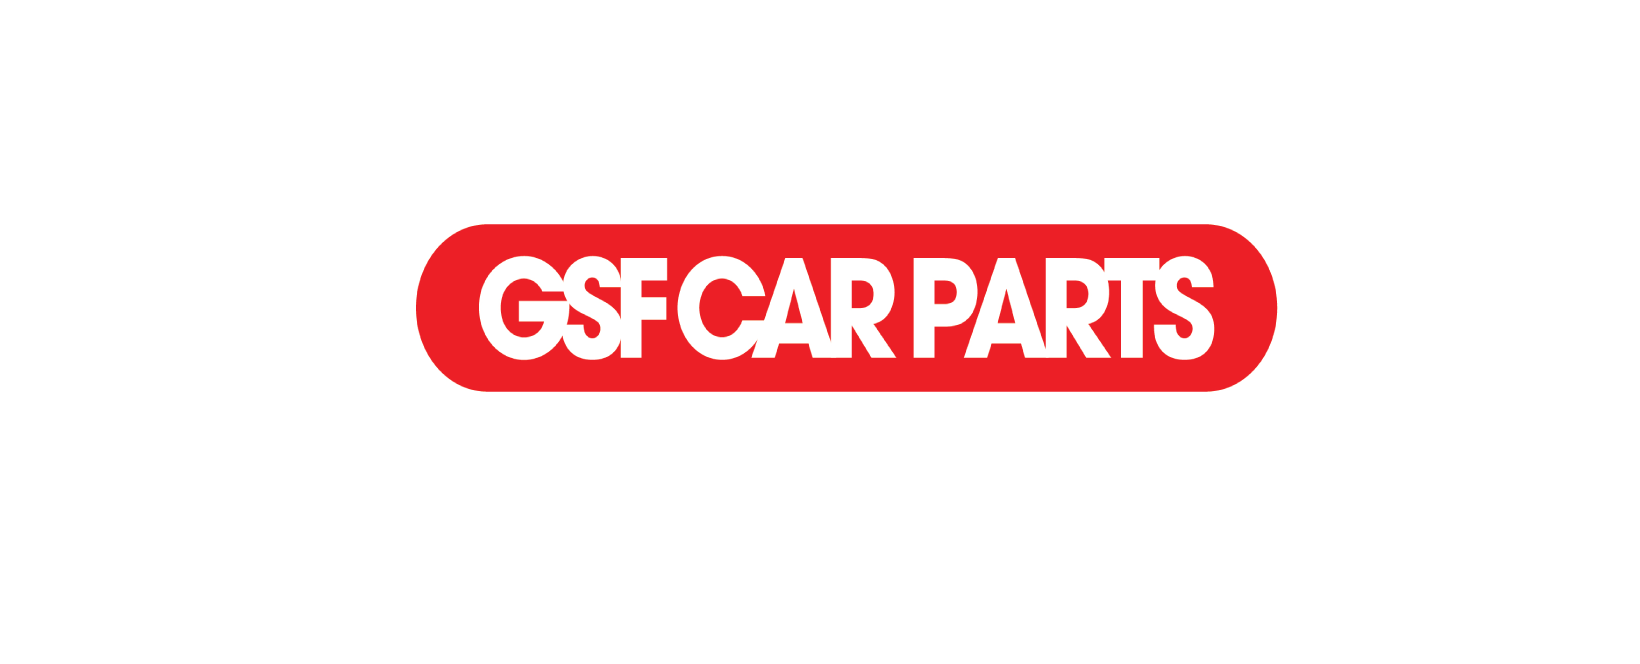 GSF Car Parts Discount Code 2022